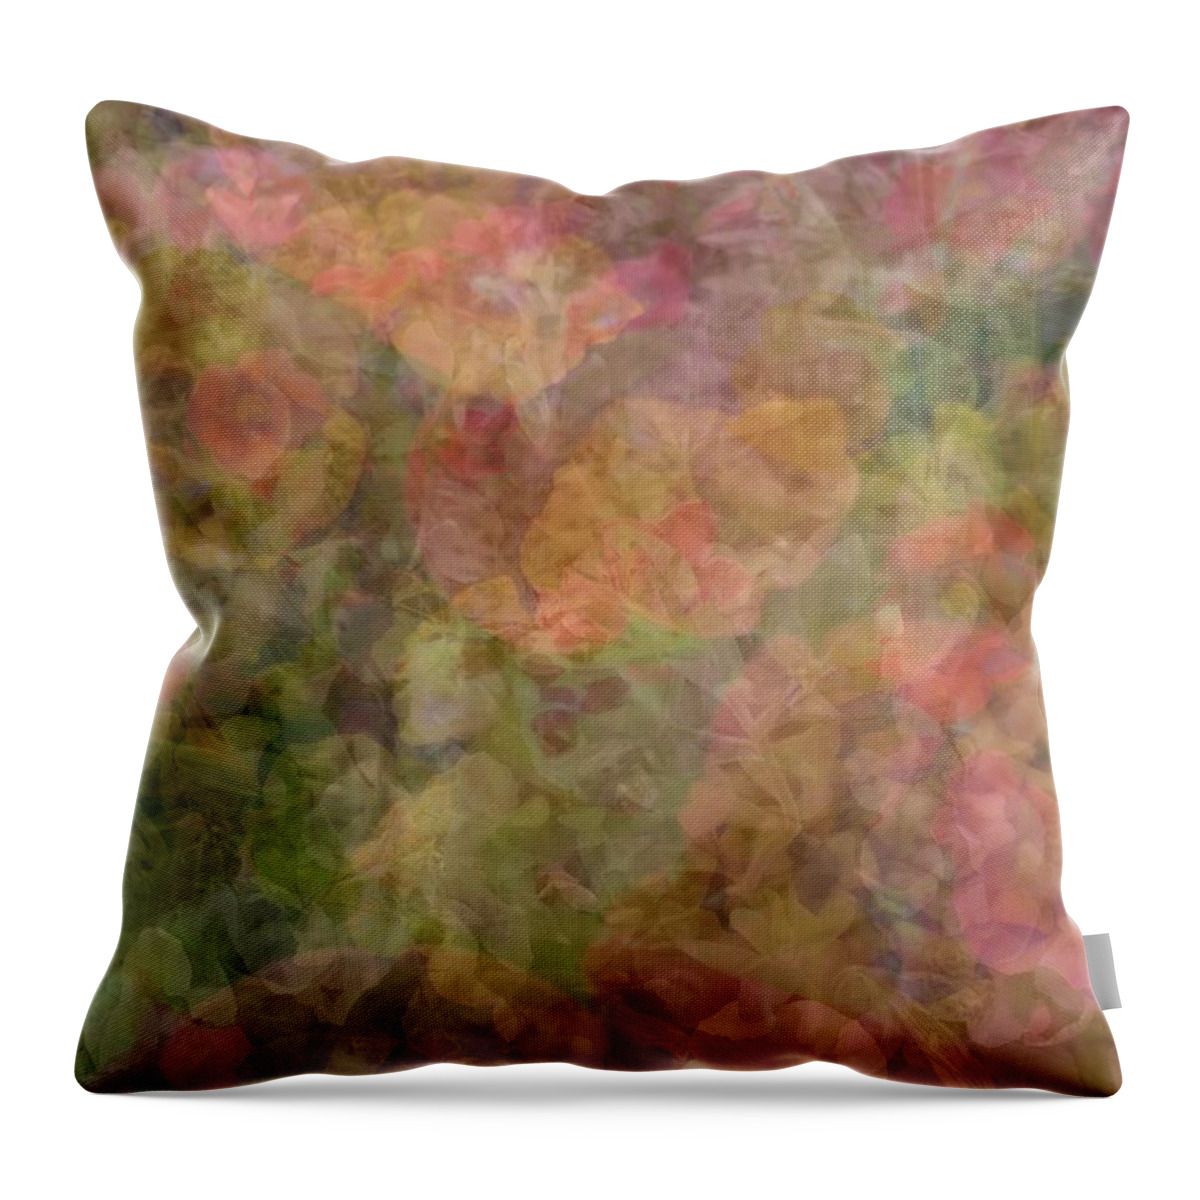 Flowers Throw Pillow featuring the photograph Pink Blossoms Clutter Collage by Kathy Barney